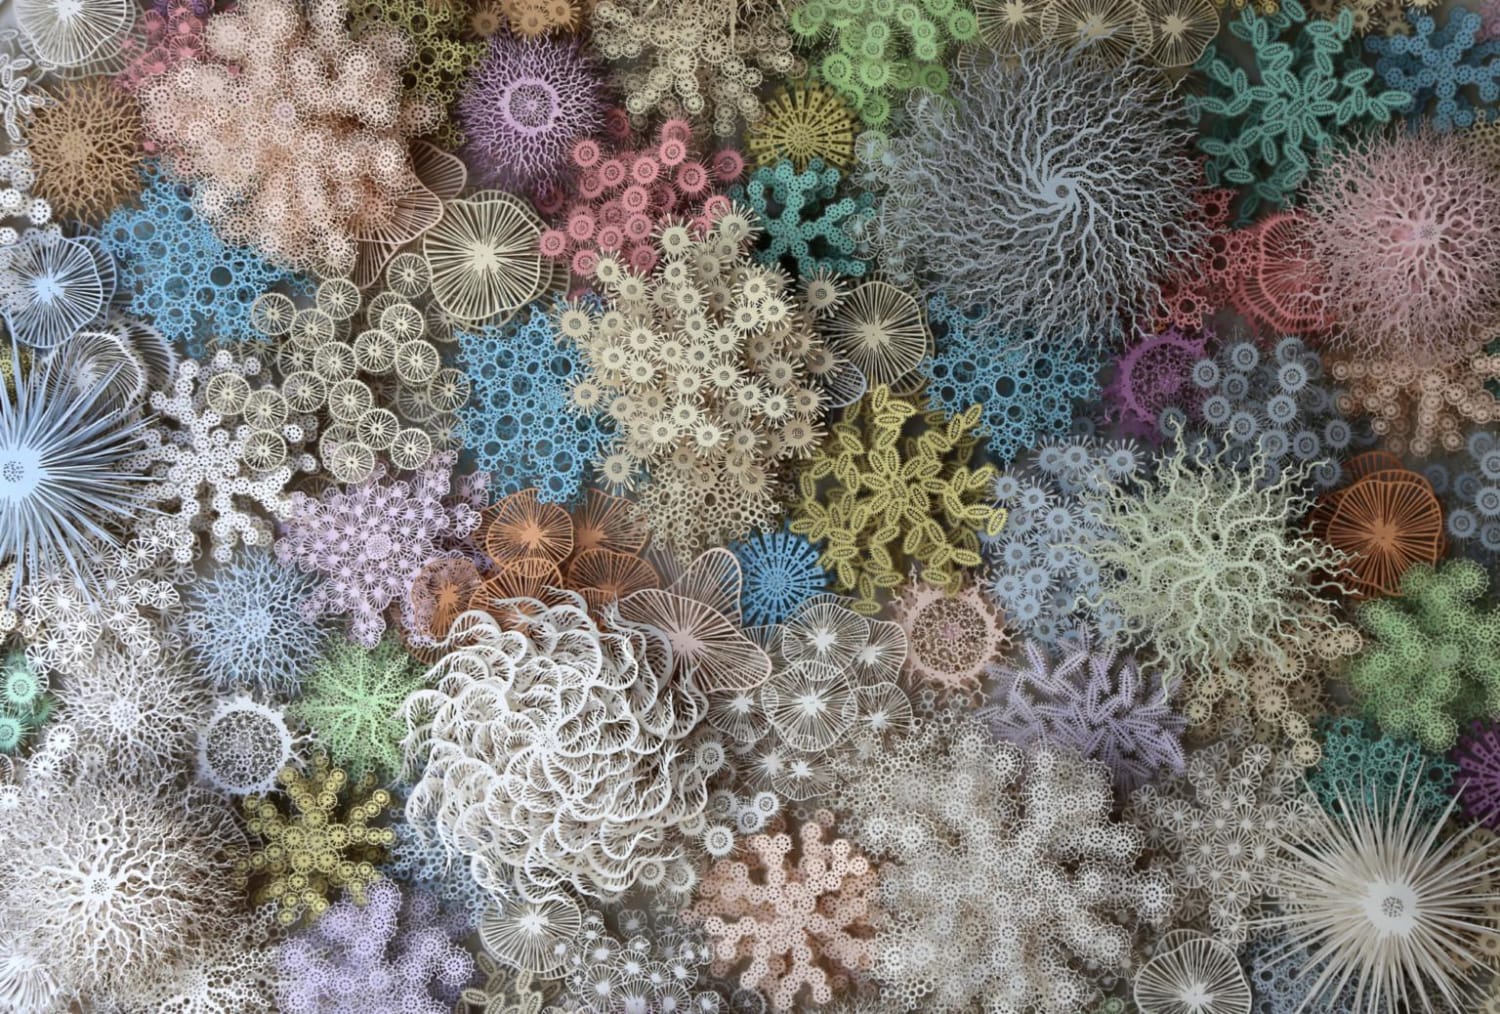 The Human Microbiome Reimagined as a Cut-Paper Coral Reef by Rogan Brown